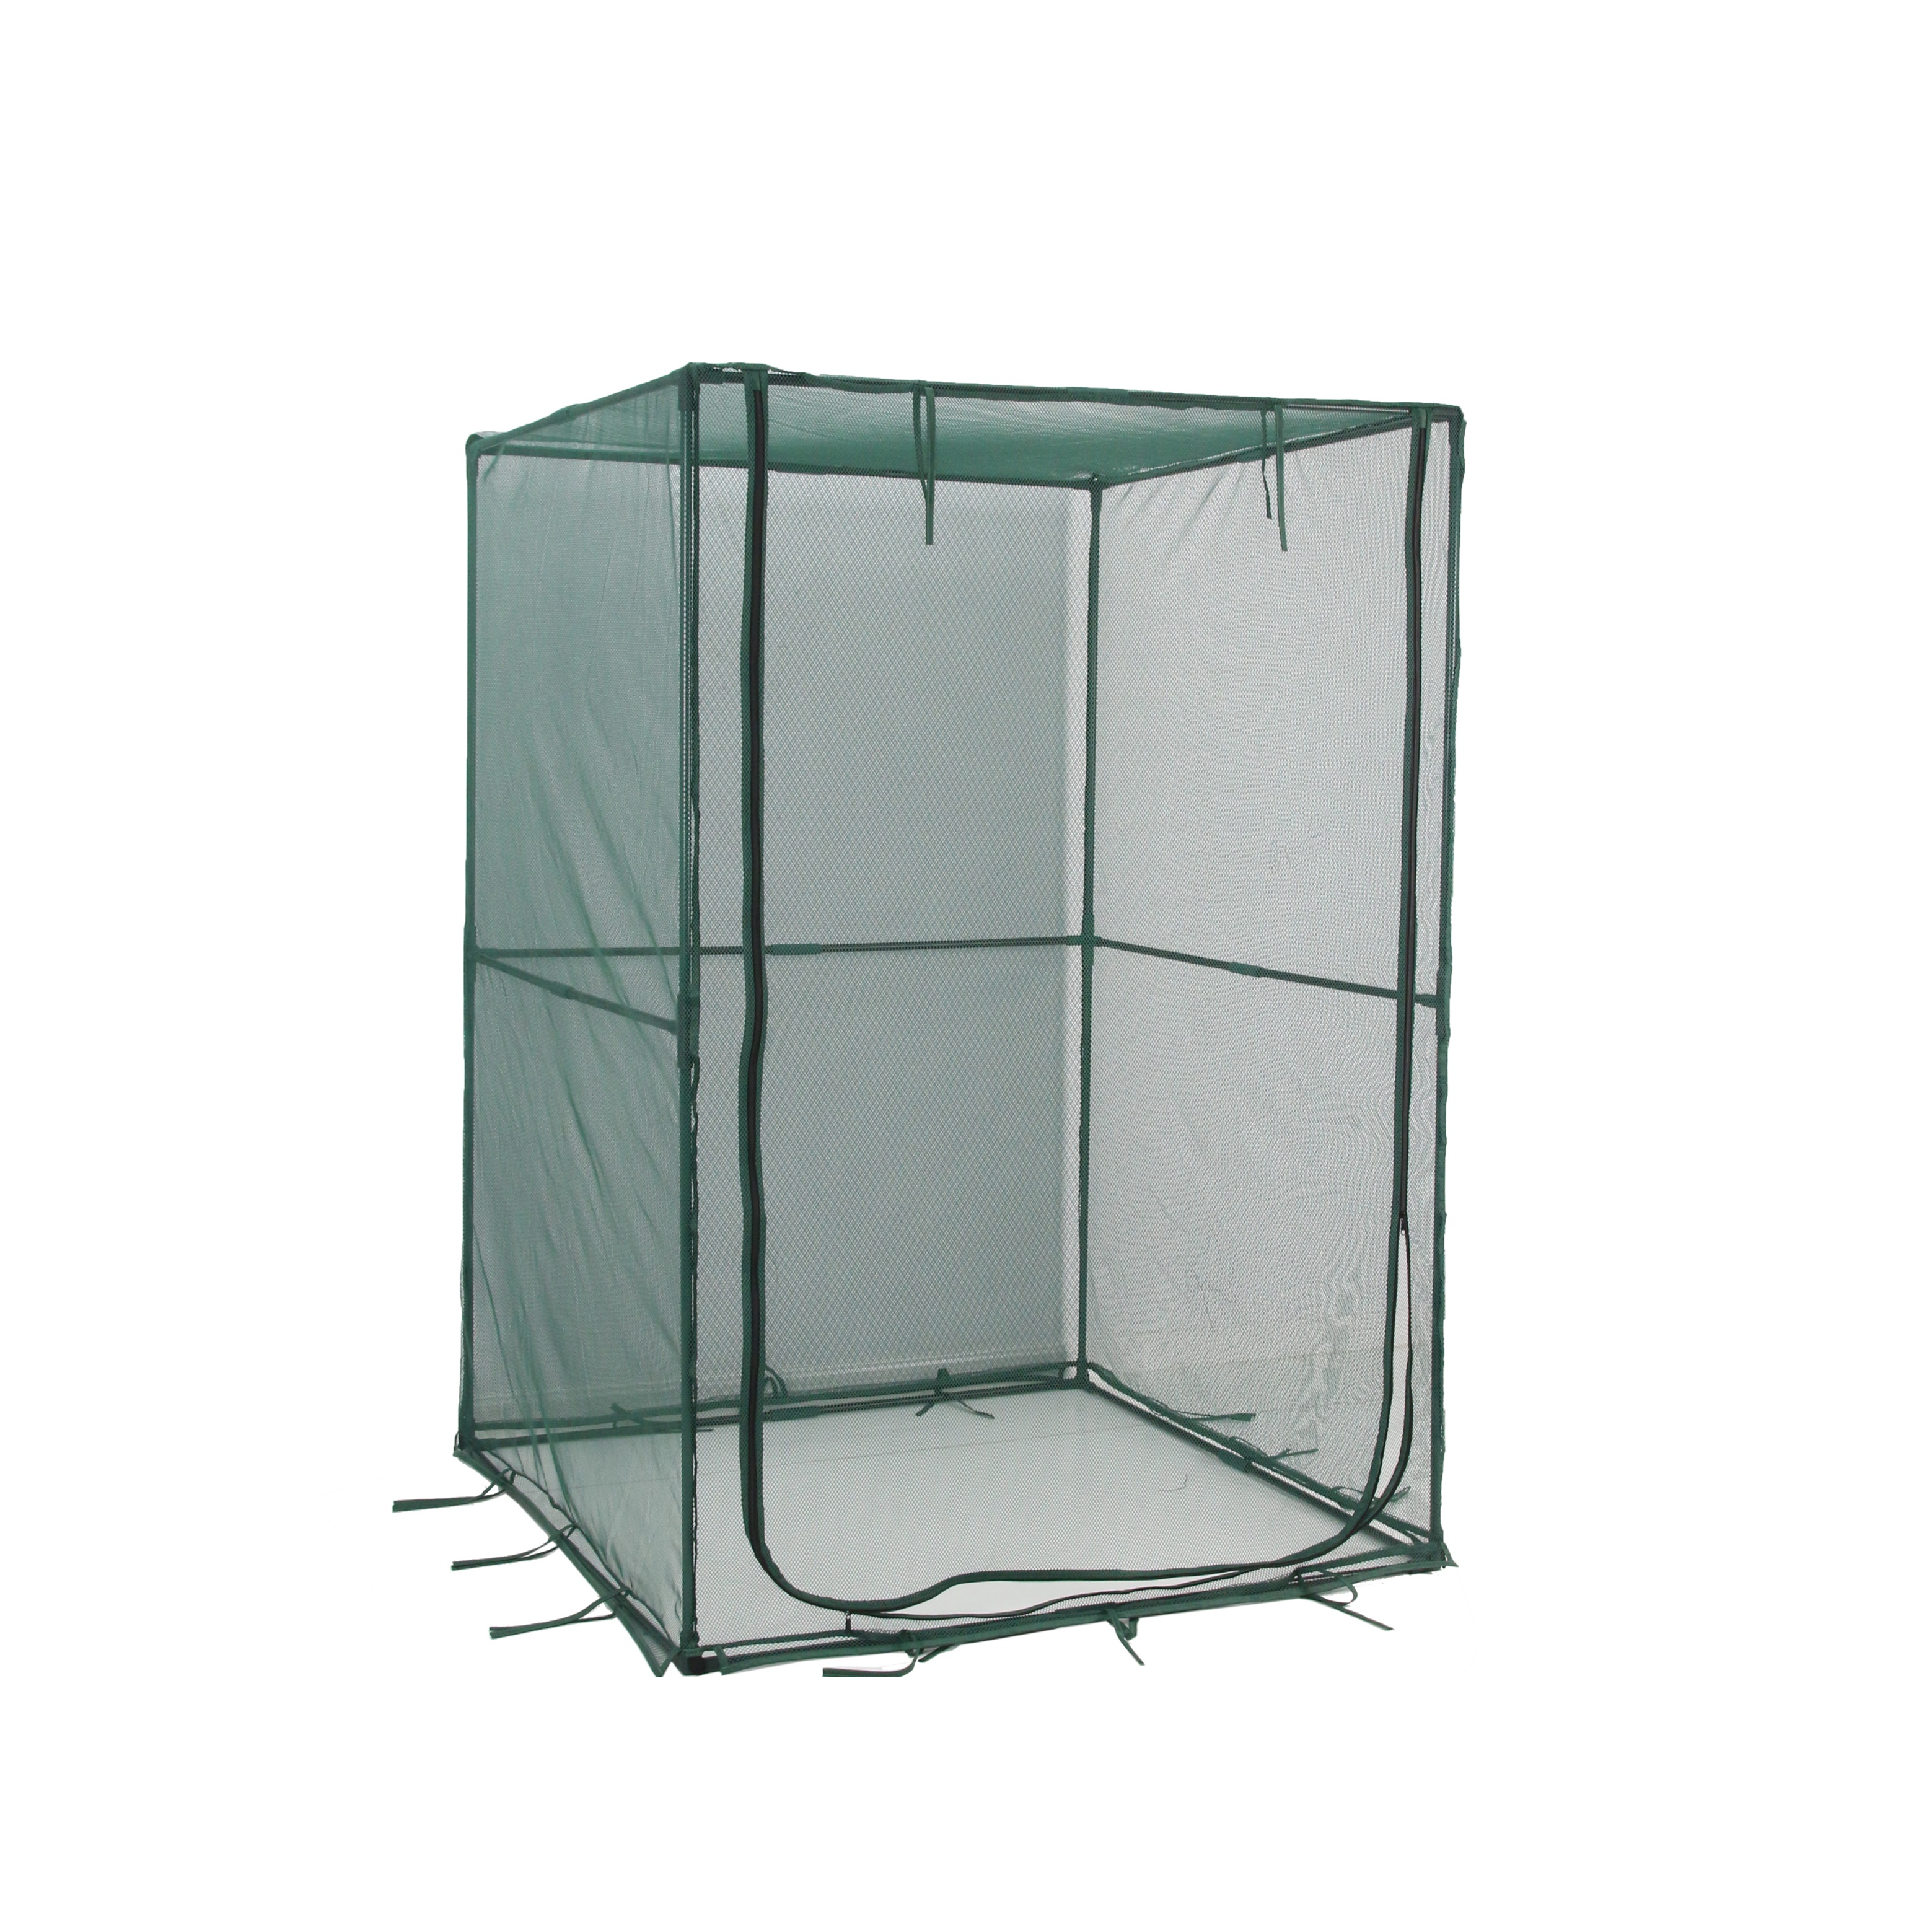 TALL Crop Protection Cage – 1.25m2 x 1.8m High